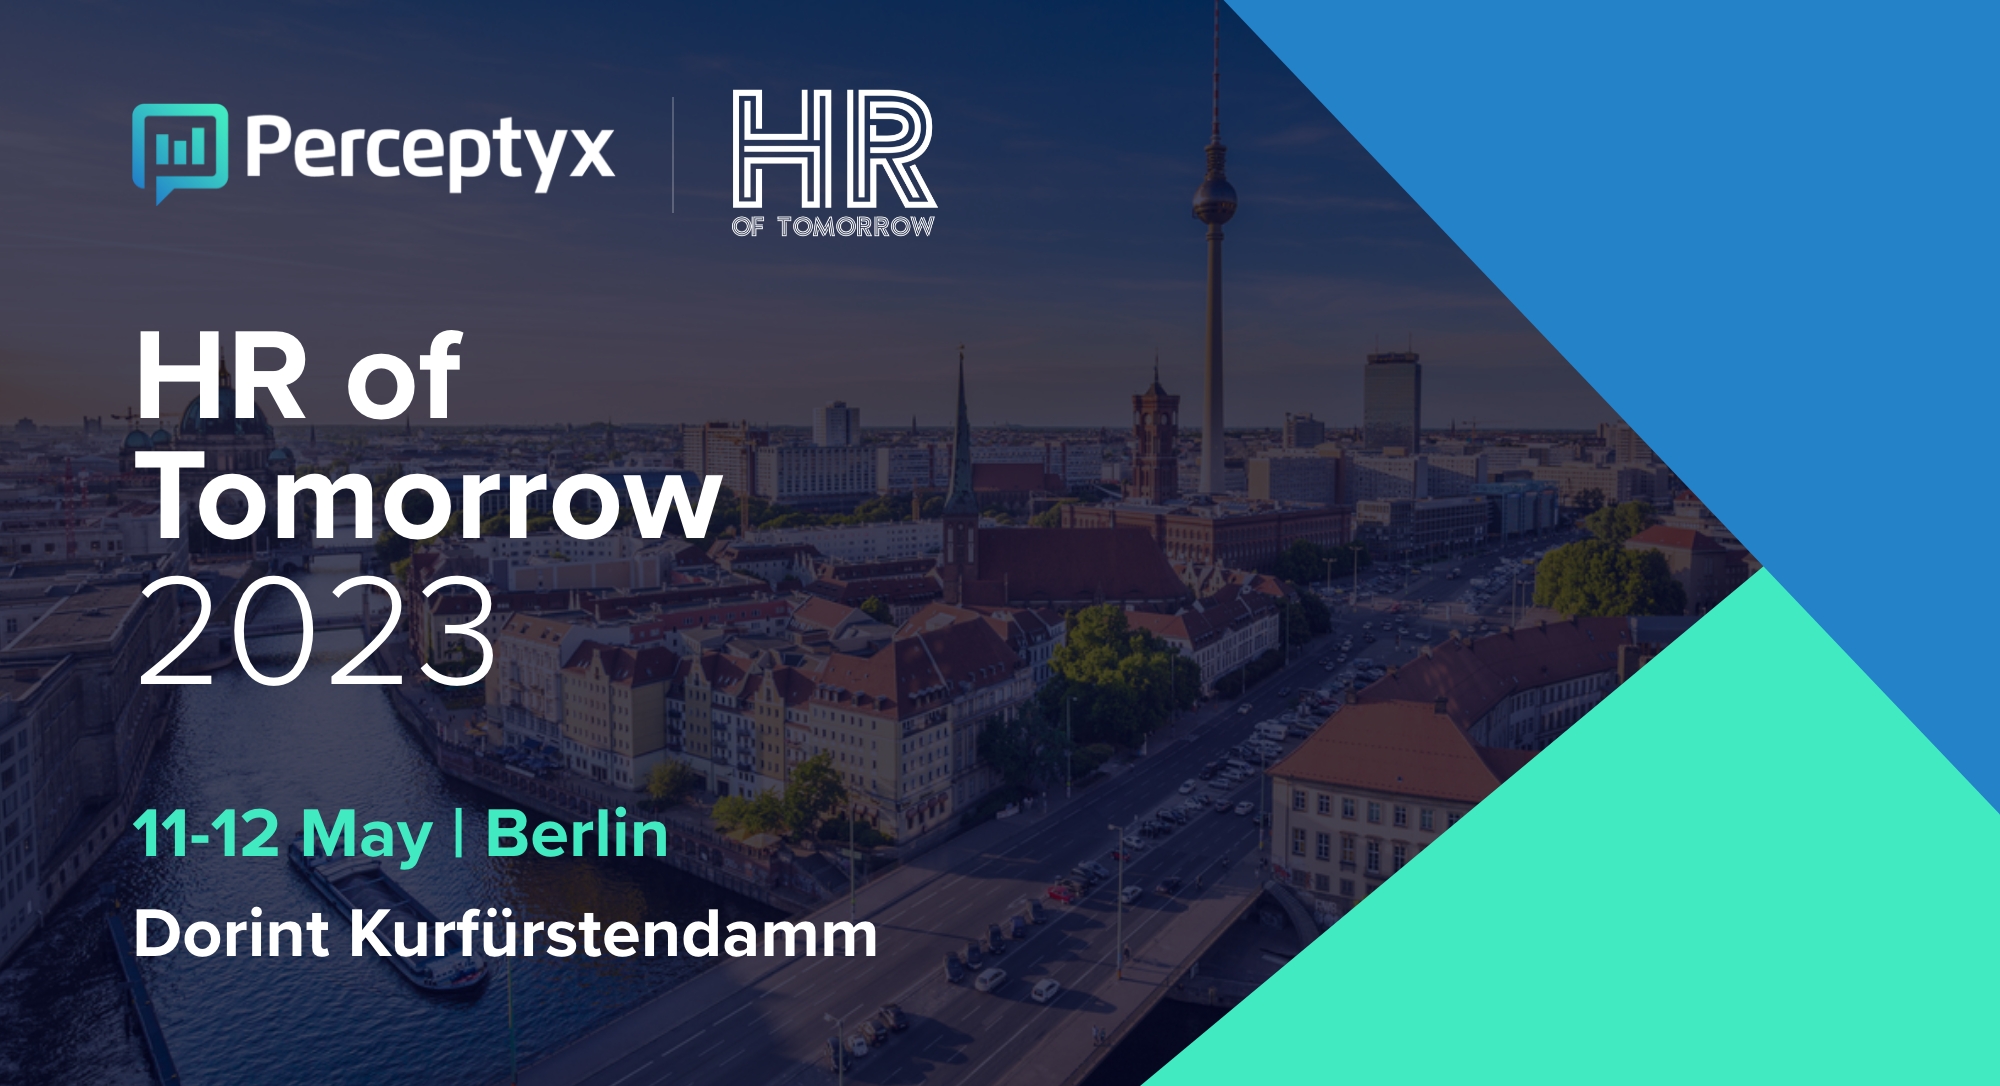 HR of Tomorrow Conference with Perceptyx